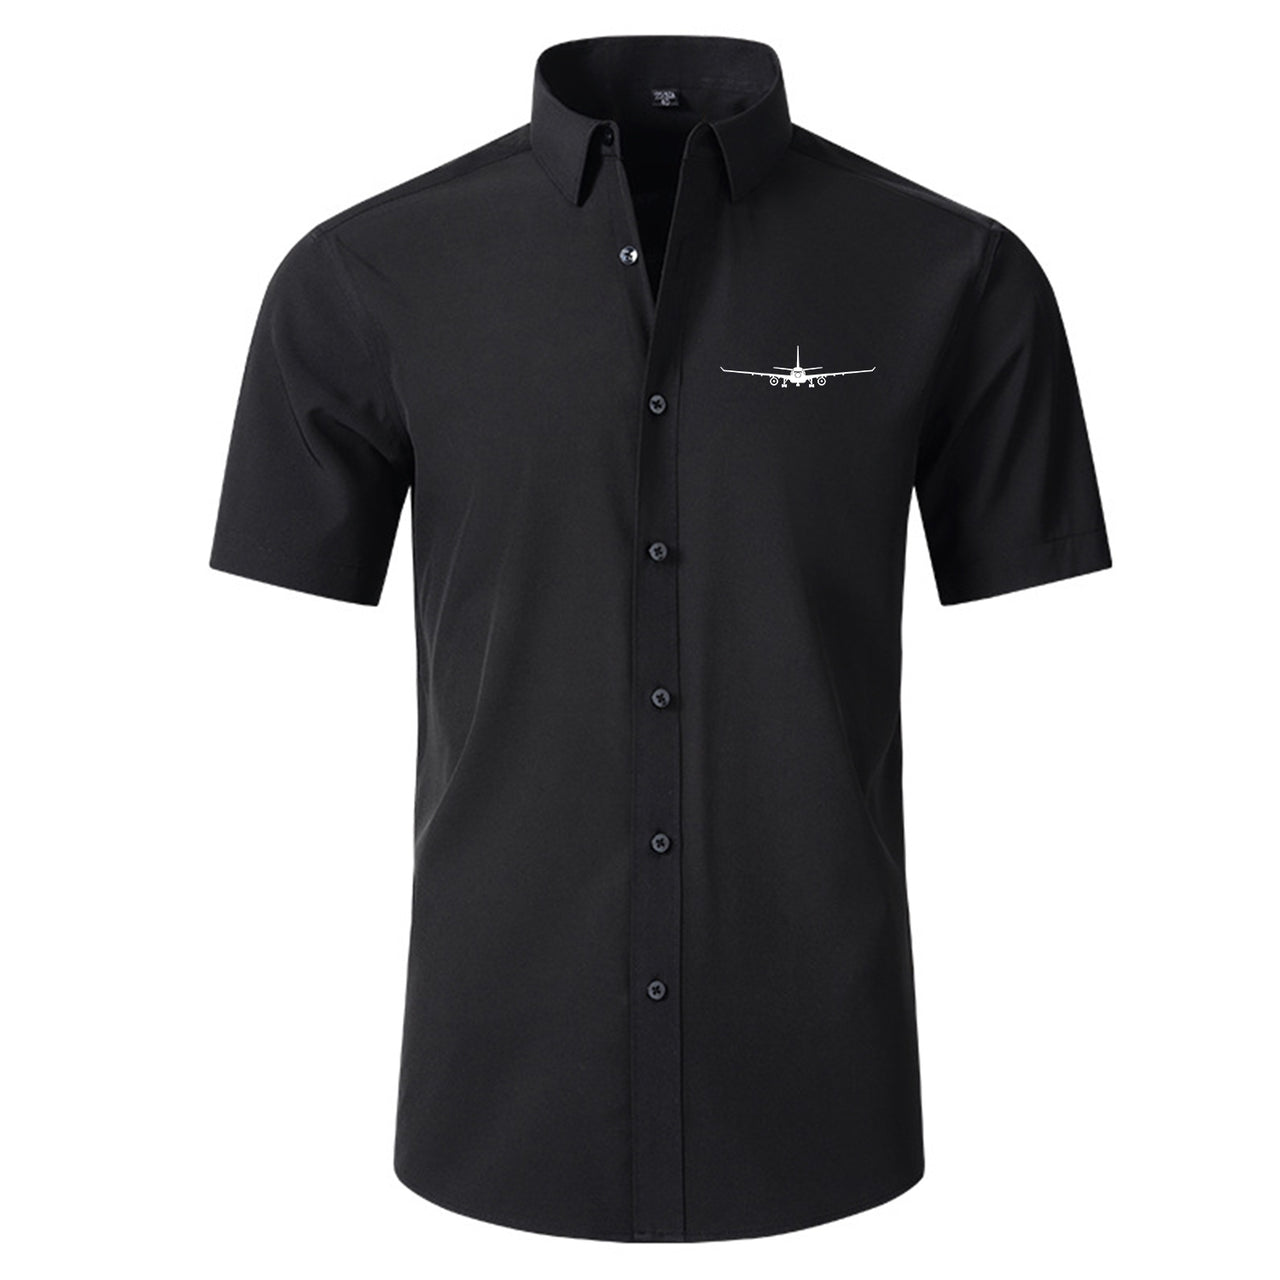 Airbus A330 Silhouette Designed Short Sleeve Shirts